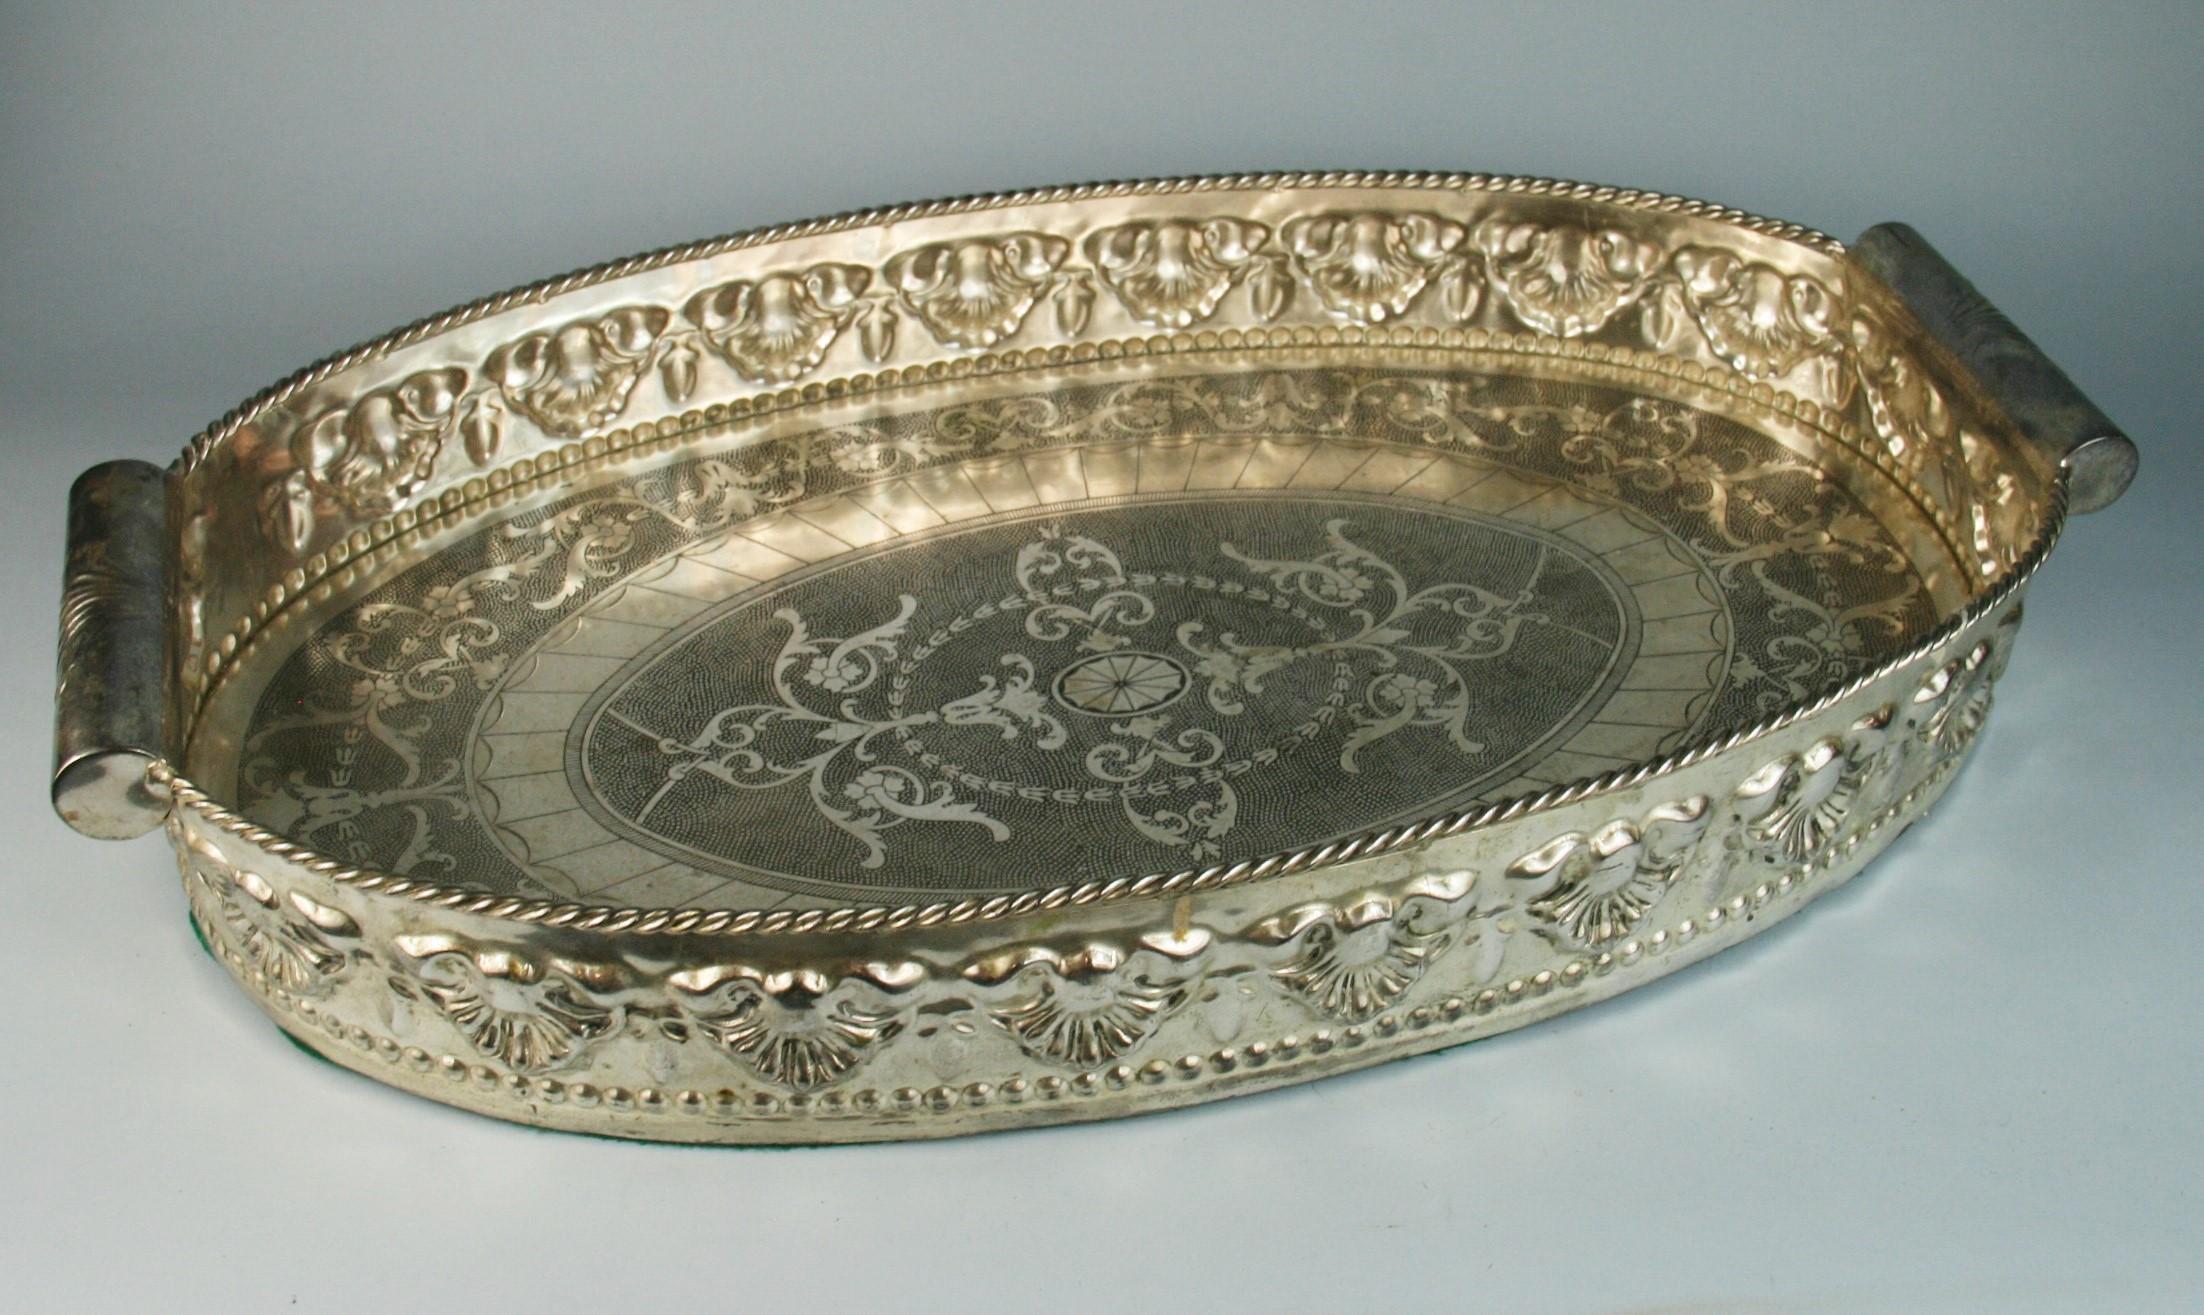 3-620 English  silvered brass  high bordered gallery barware or serving tray with intricate detailing with round handles.